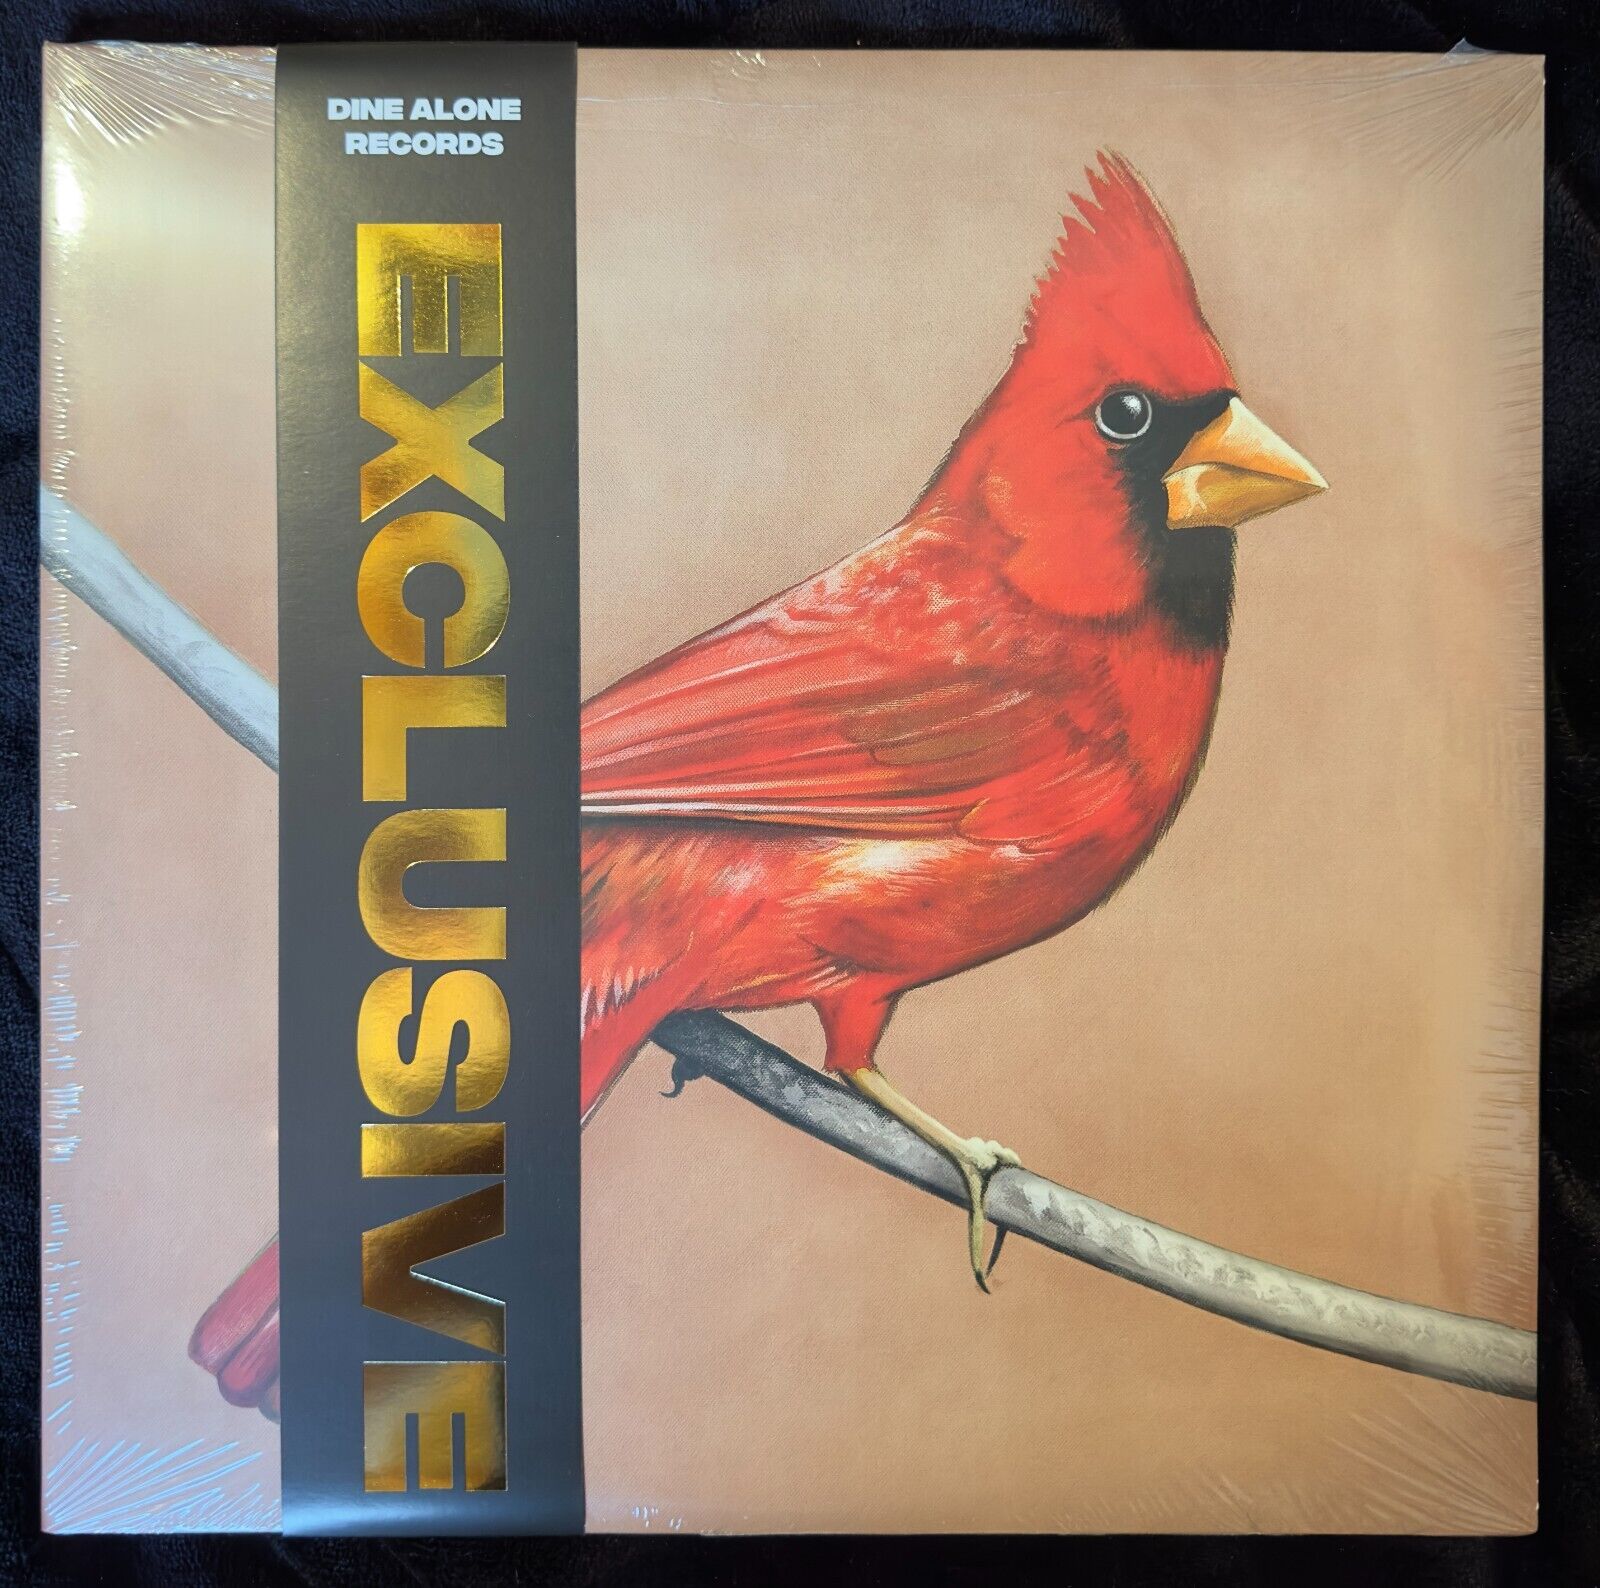 ALEXISONFIRE OLD CROWS/YOUNG CARDINALS - 2LP VINYL RECORD LTD OUT OF 100 SEALED